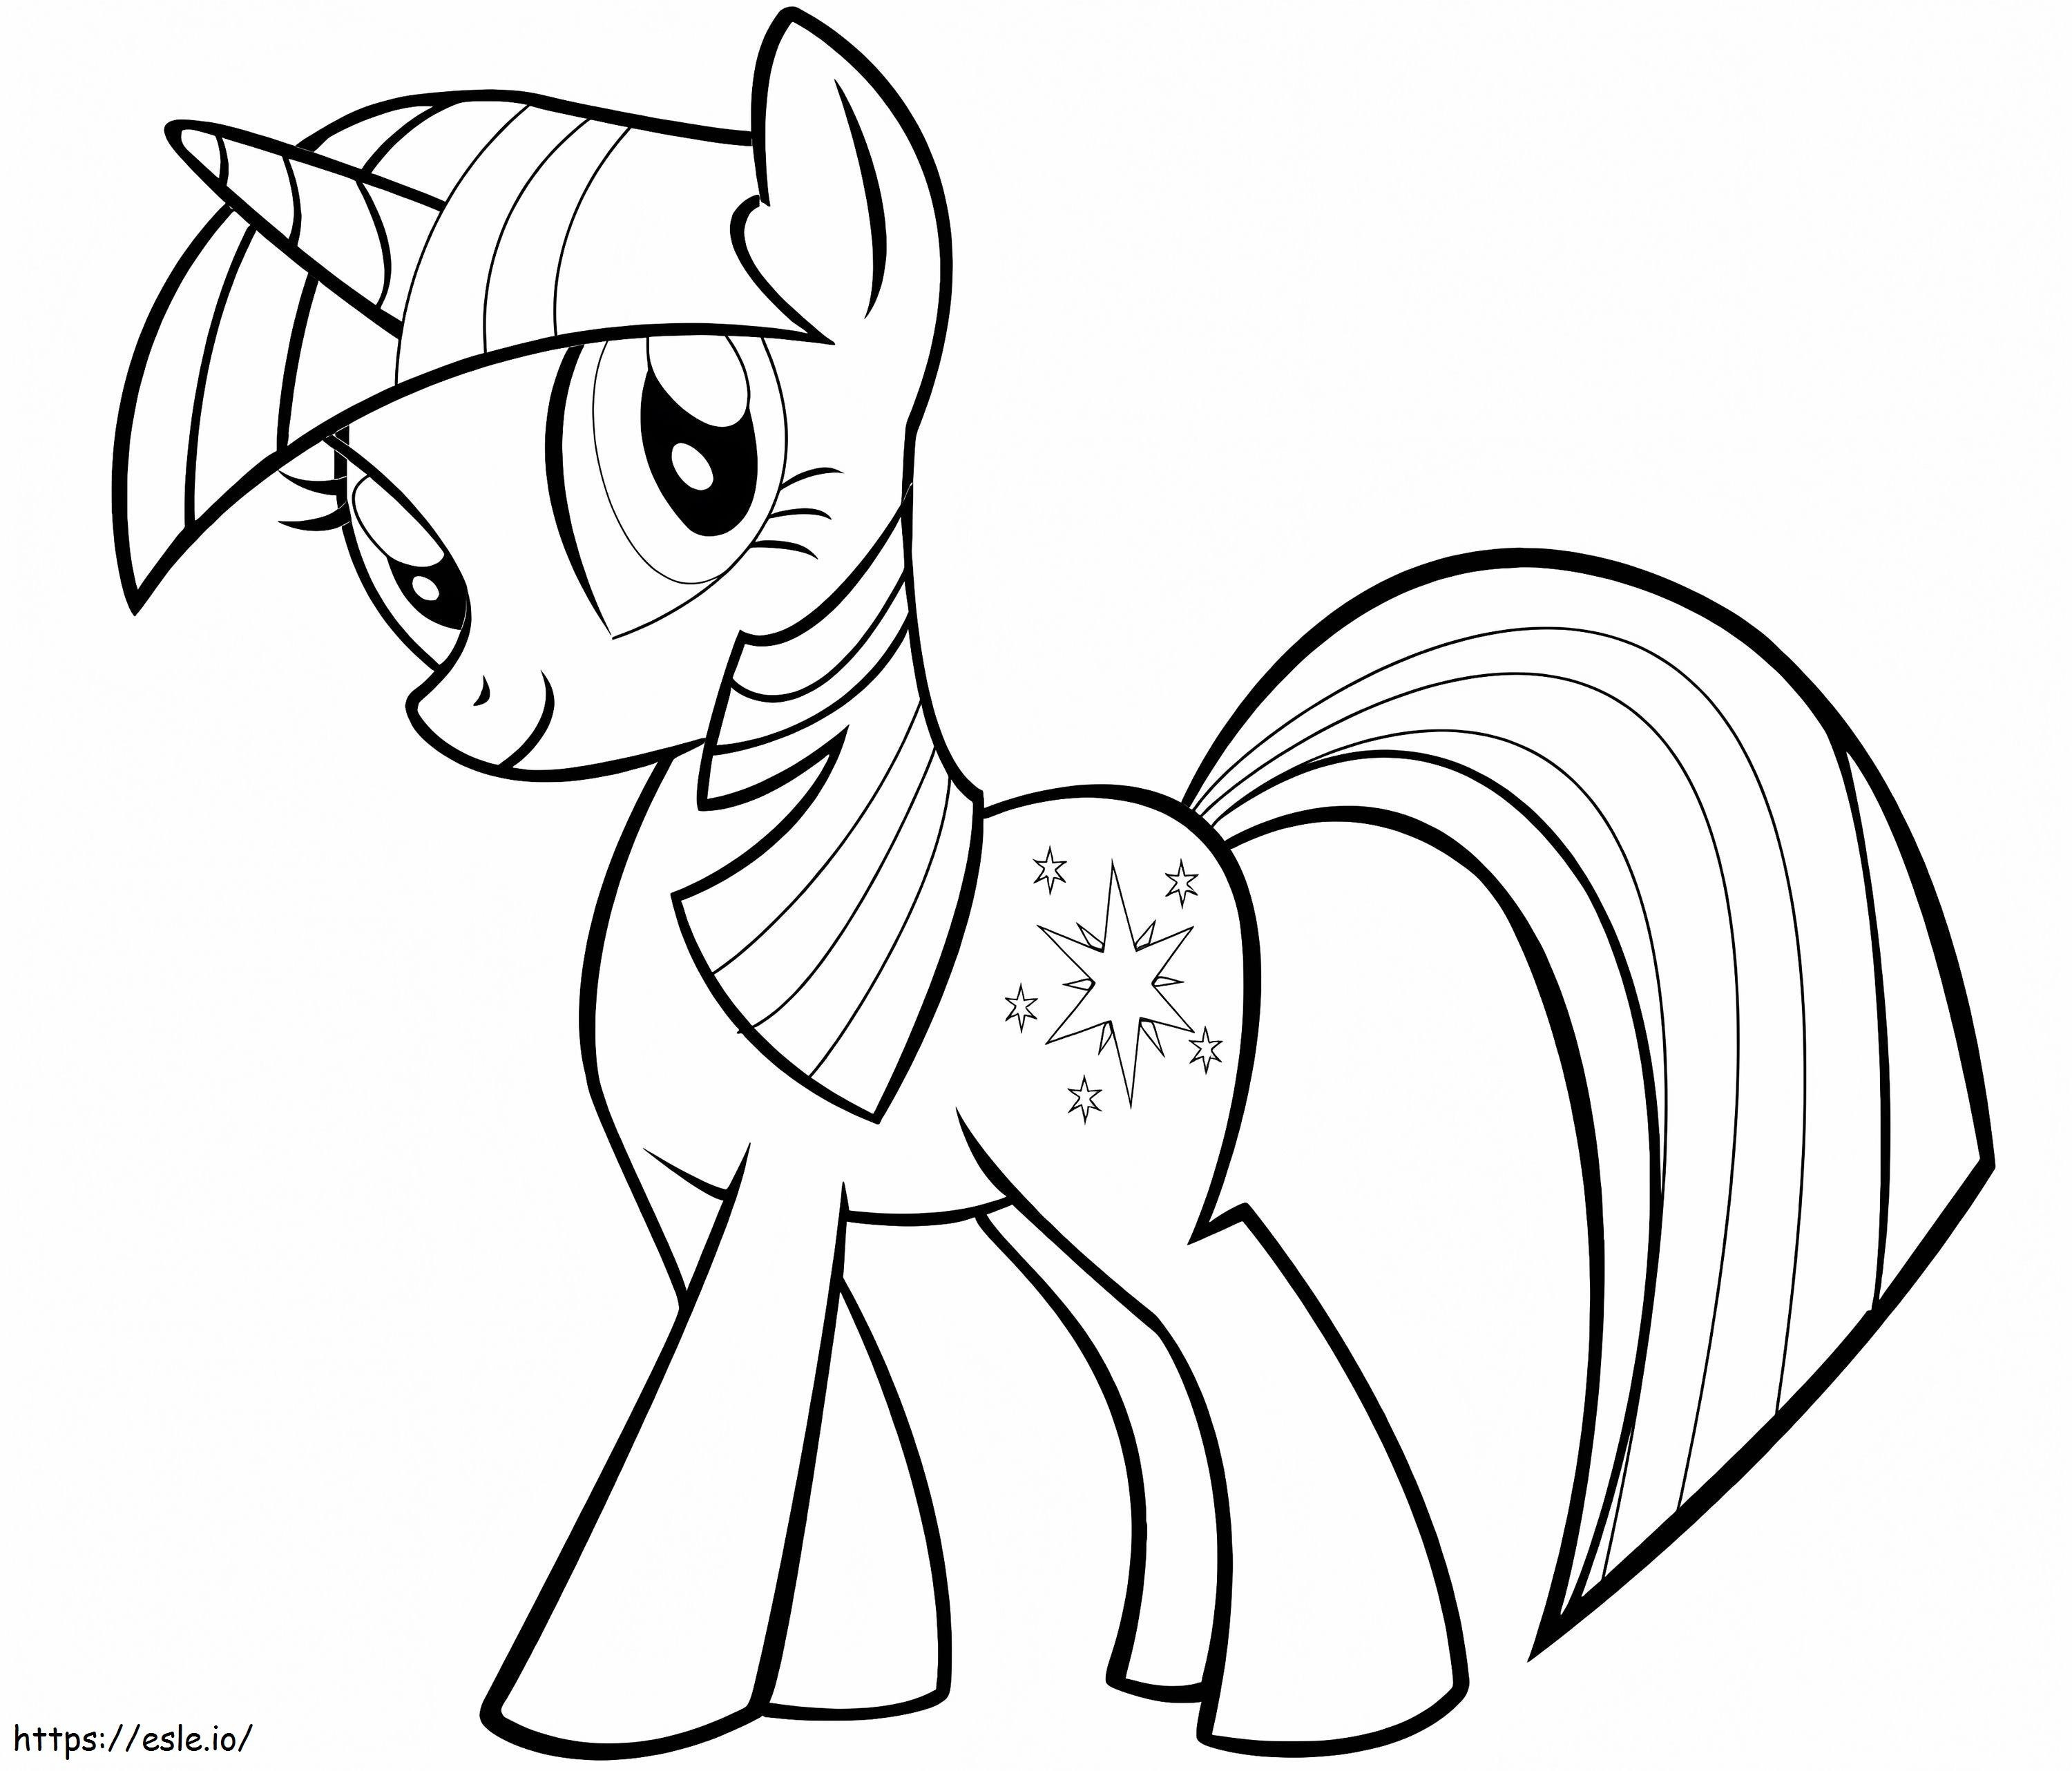 MLP Twilight Sparkle coloring page